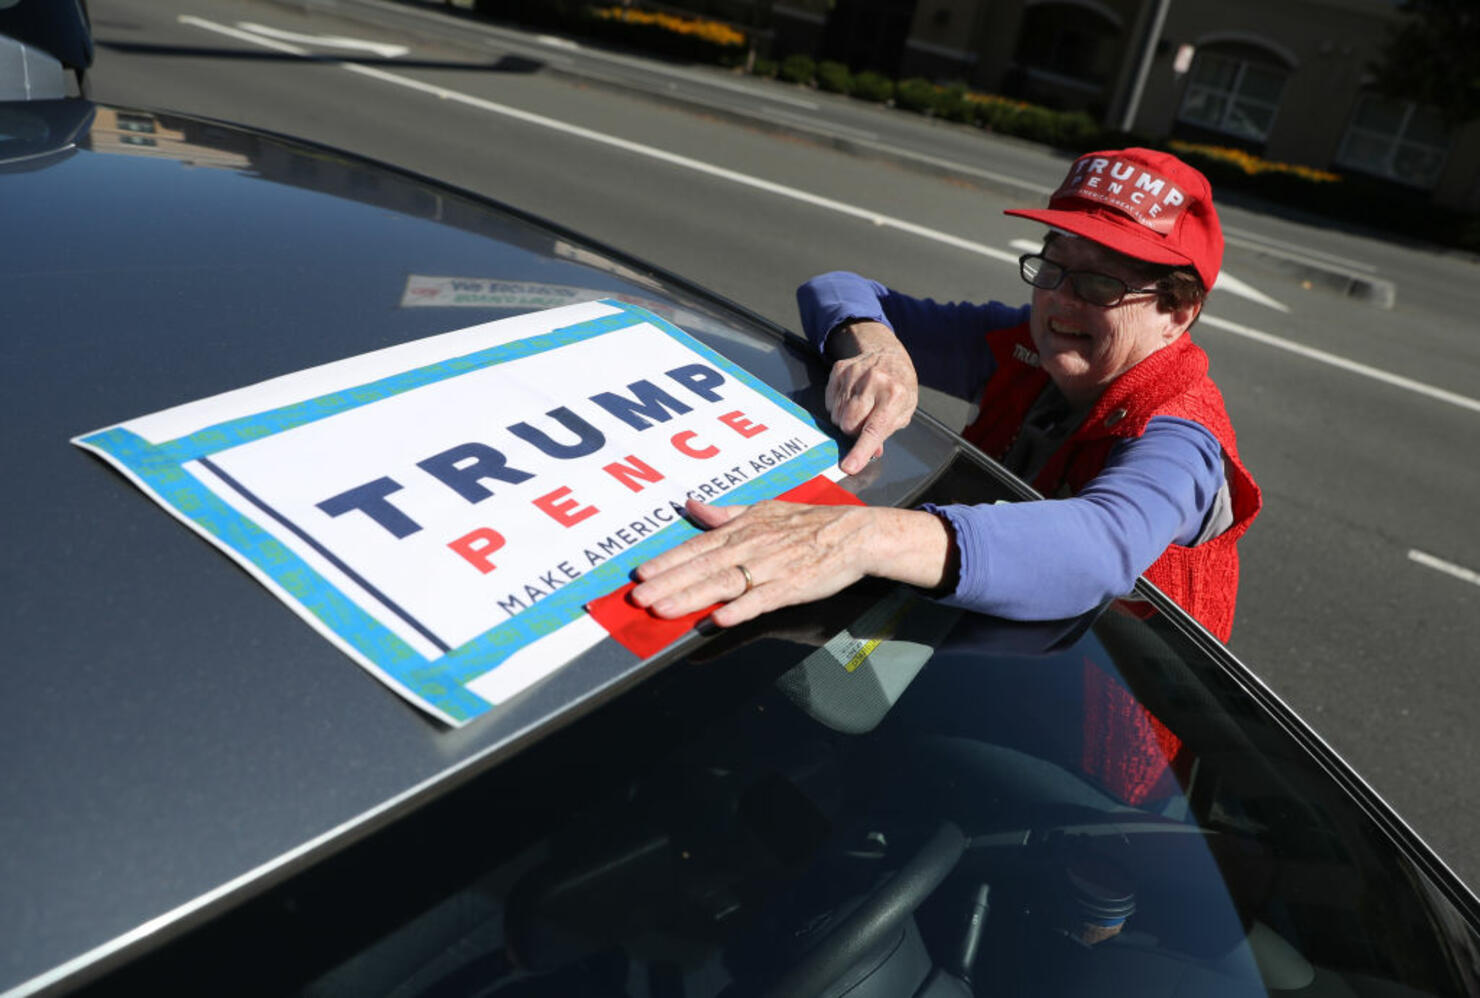 Pro-Trump Activists Rally In Support Of The President's Re-Election Bid